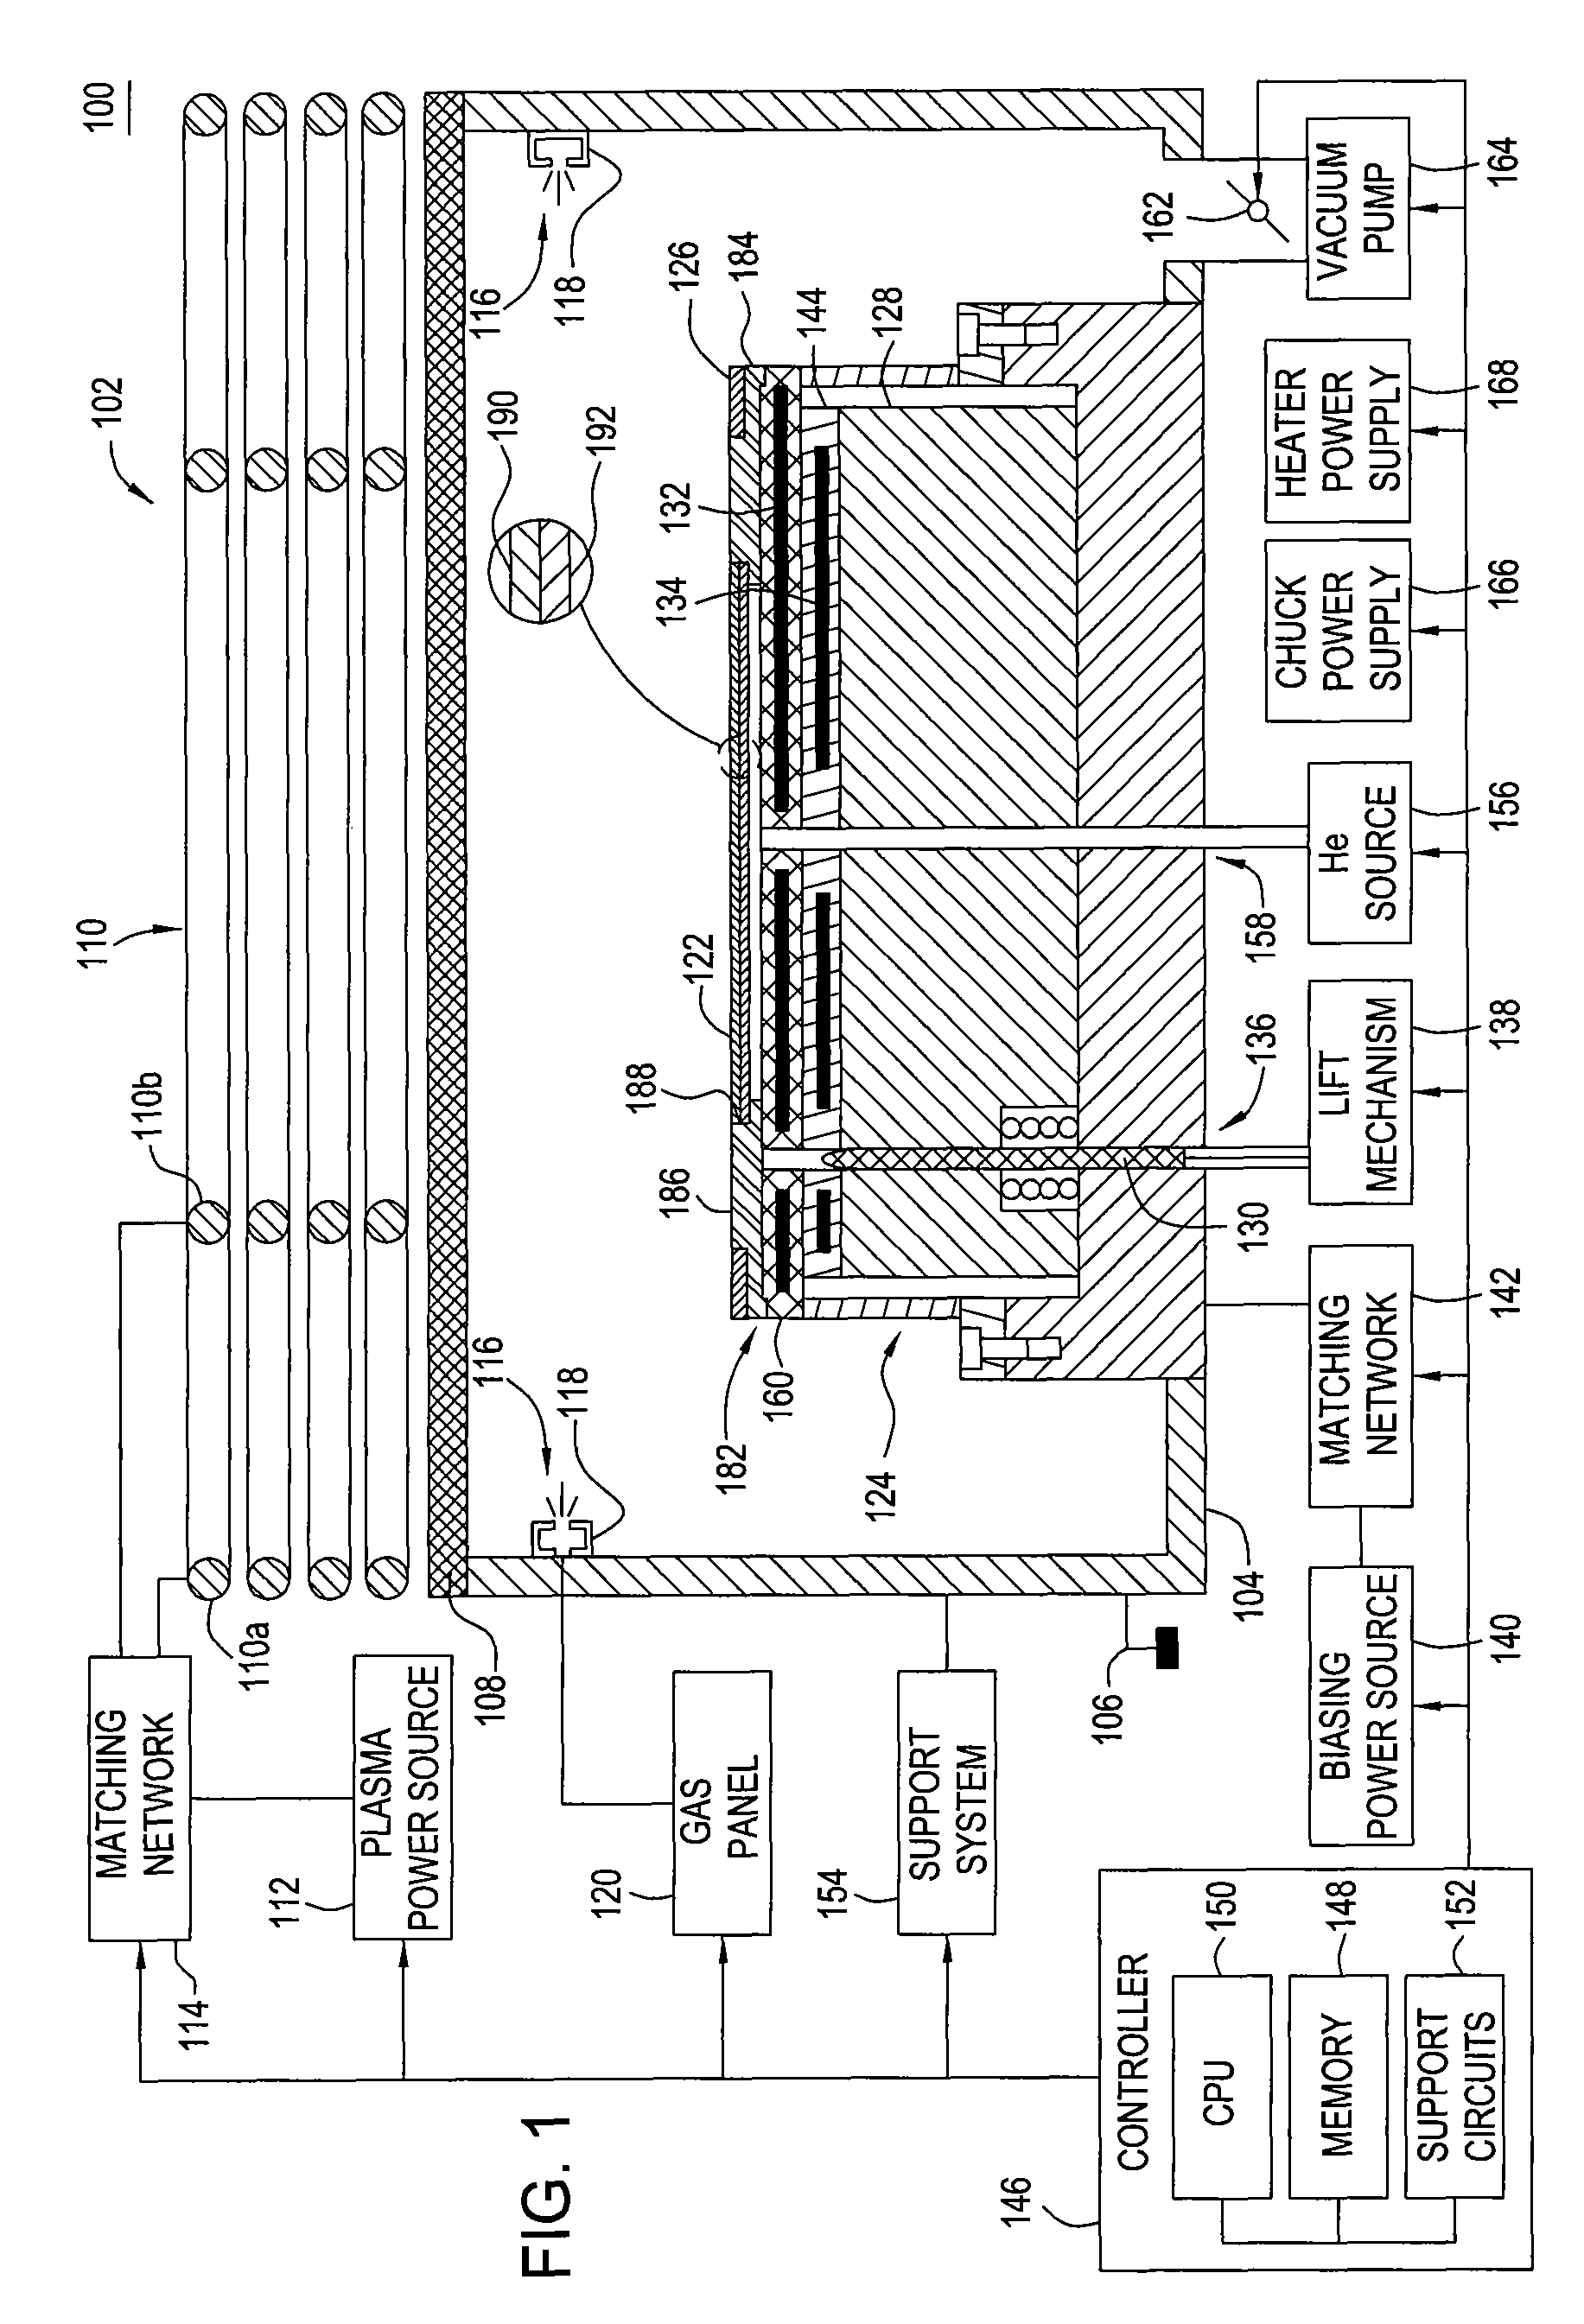 Etching of nano-imprint templates using an etch reactor